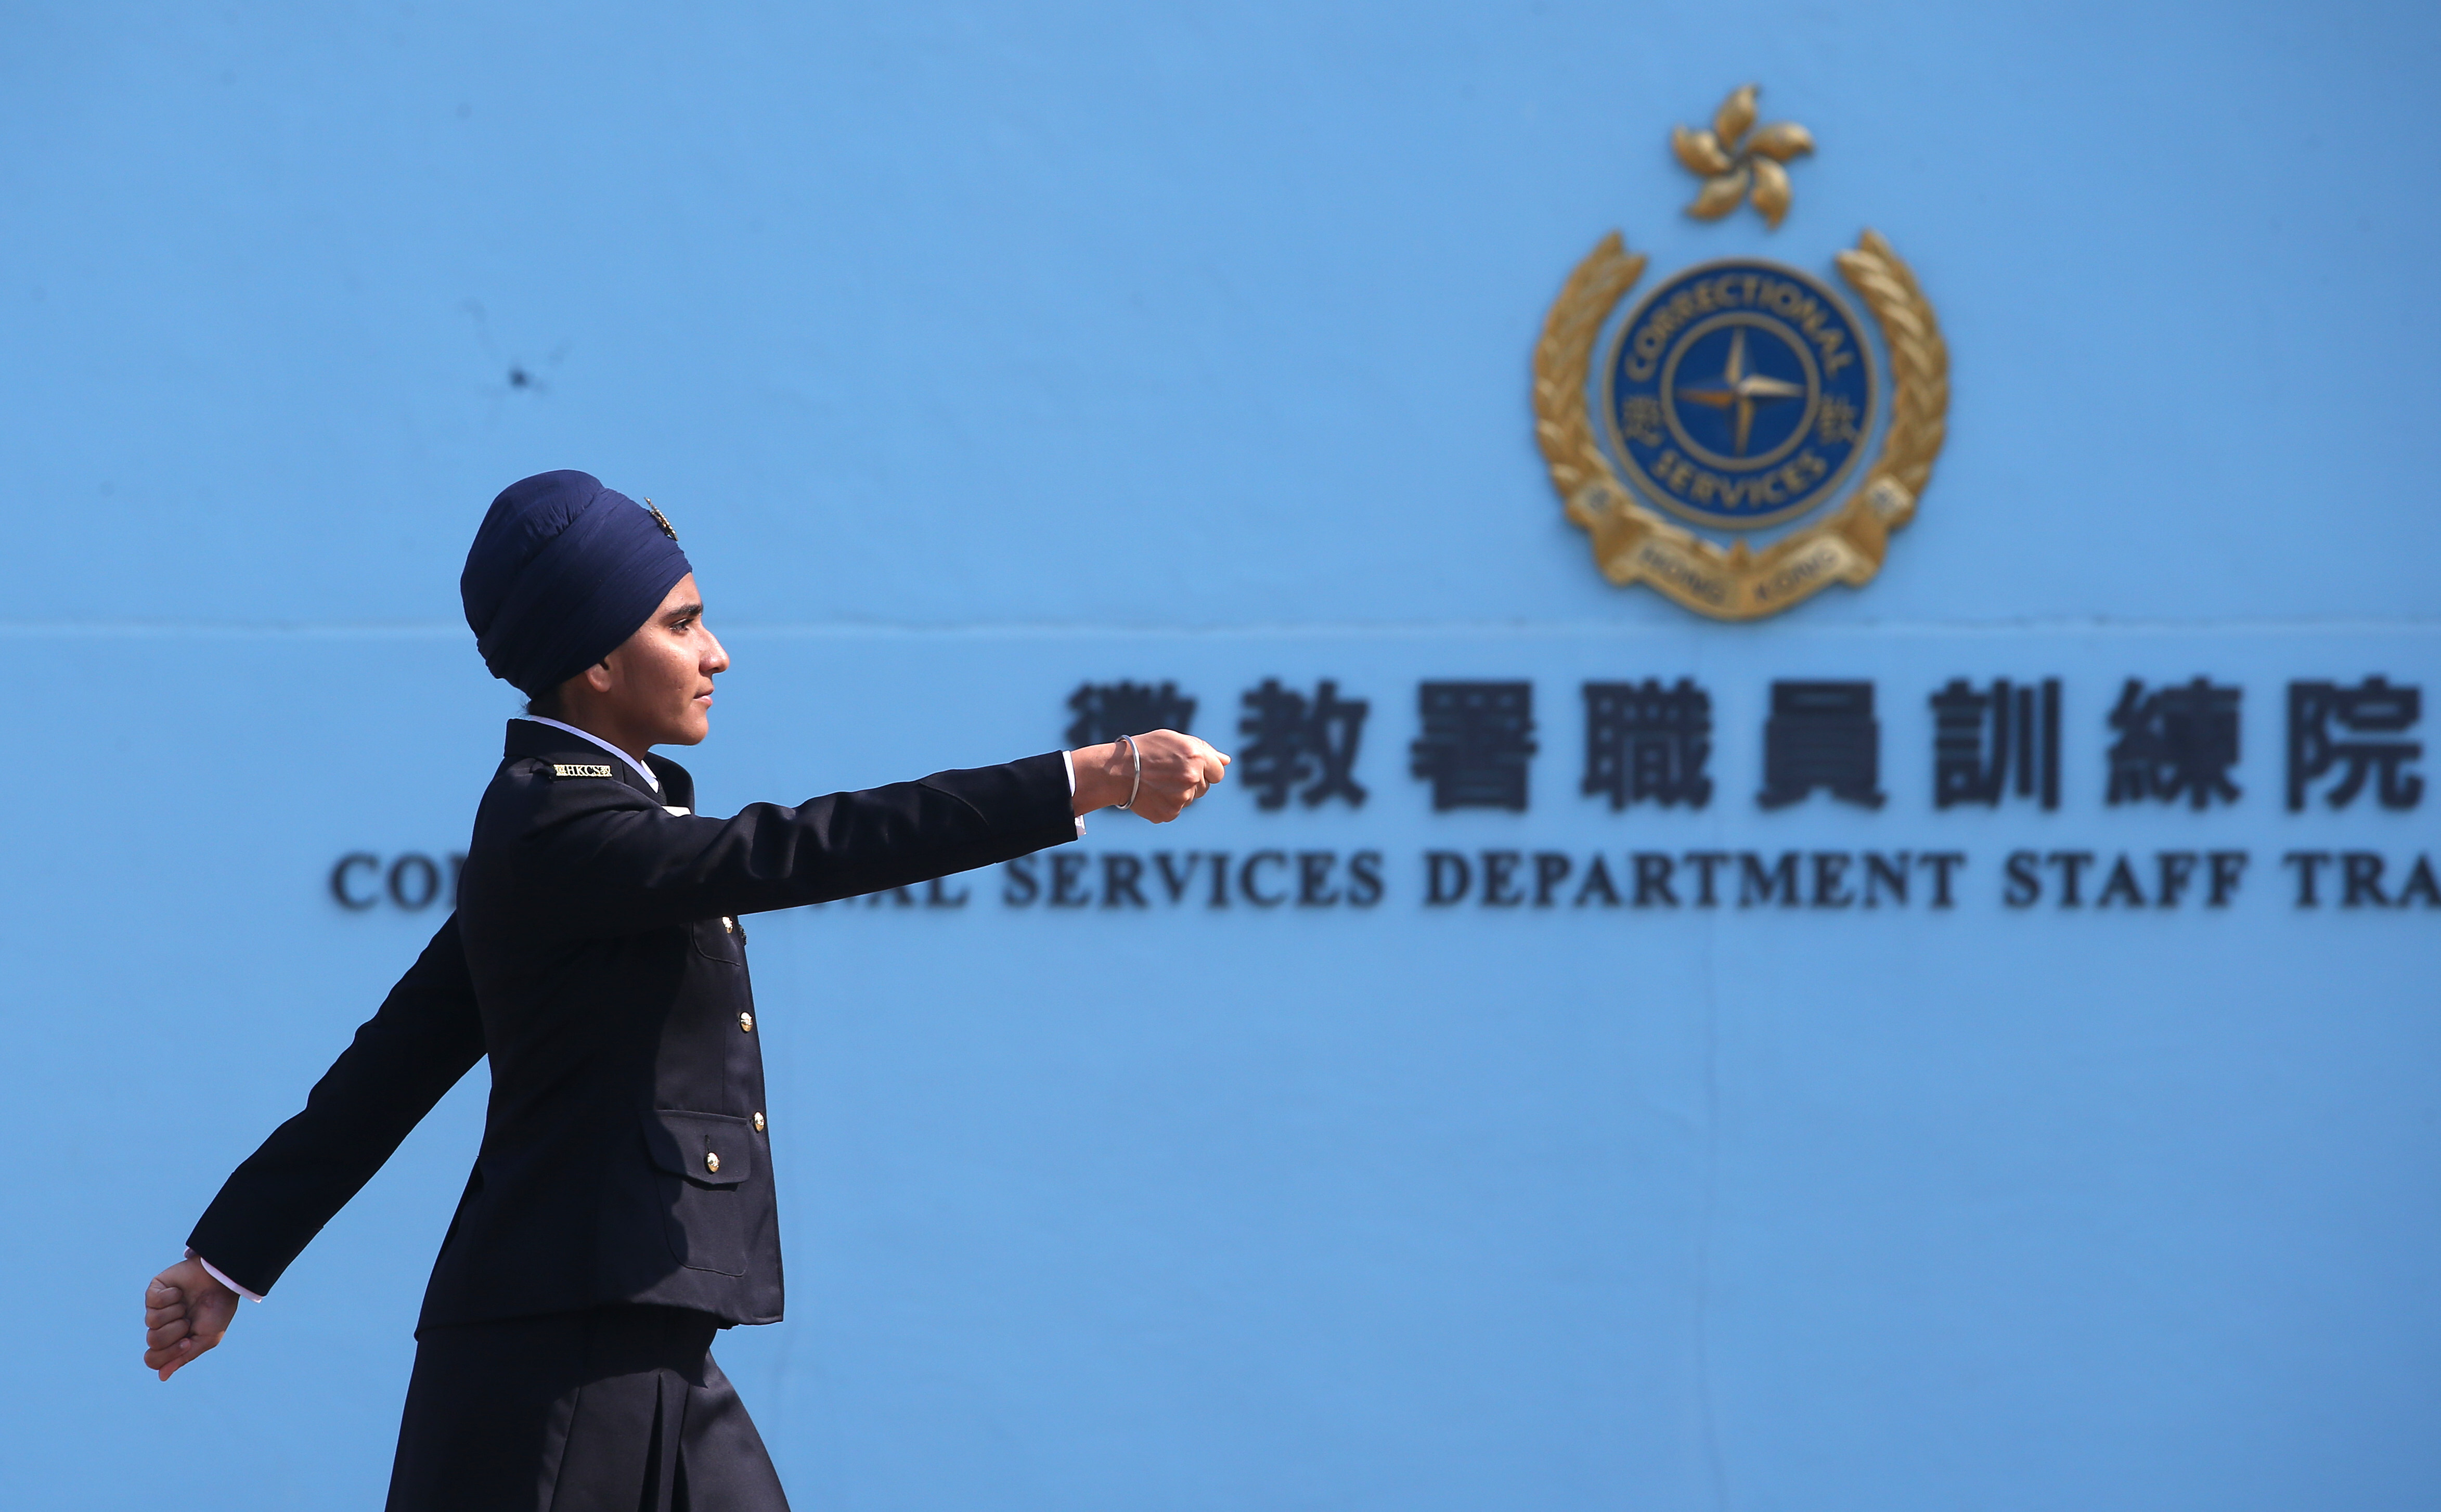 Sukhdeep Kaur, the first Sikh female prison officer to wear a turban in Hong Kong, marches in lockstep at the Hong Kong Correctional Services Department in Stanley on December 12, 2019. Attaining proficiency in the Chinese language has long been a challenge for members of Hong Kong’s ethnic minority communities. Photo: David Wong